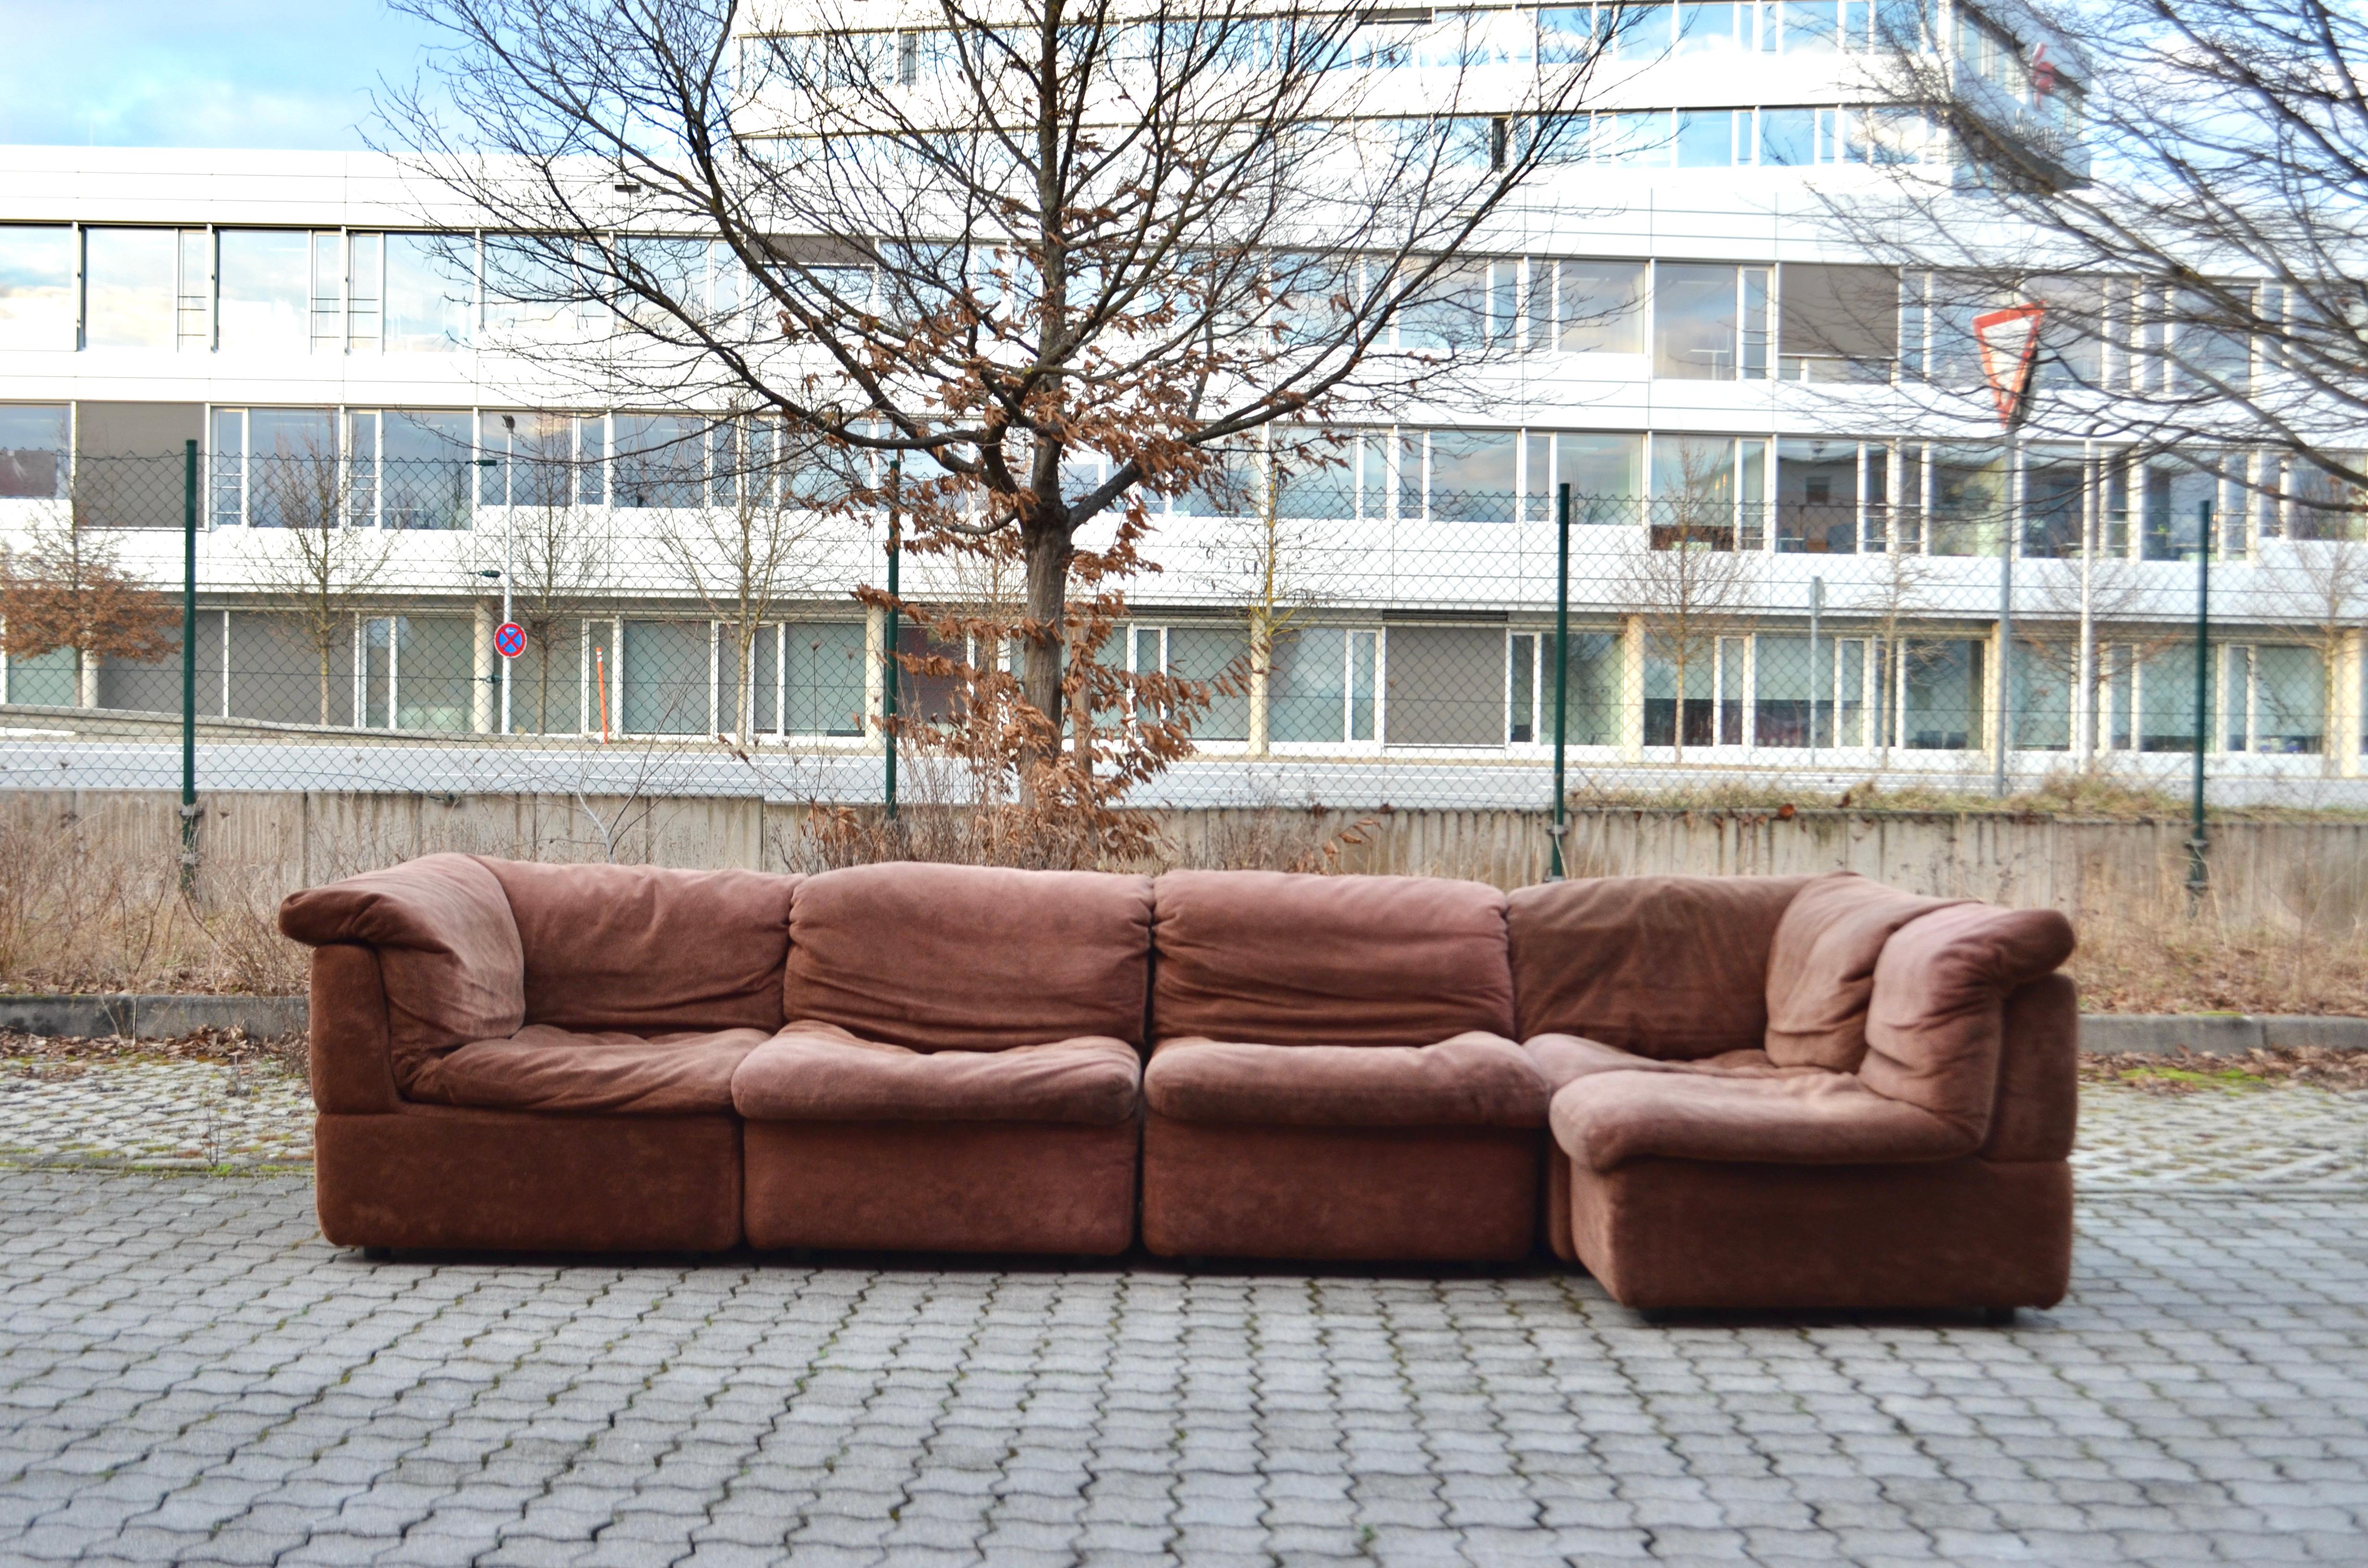 This Modular sectional sofa was designed by Rolf Benz and manufactured in Germany.
It is a pure 70ties design with timeless modern shape.
The fabric is Velours and has a brown color with a soft touch.
The frame of every element is made of hardfoam/